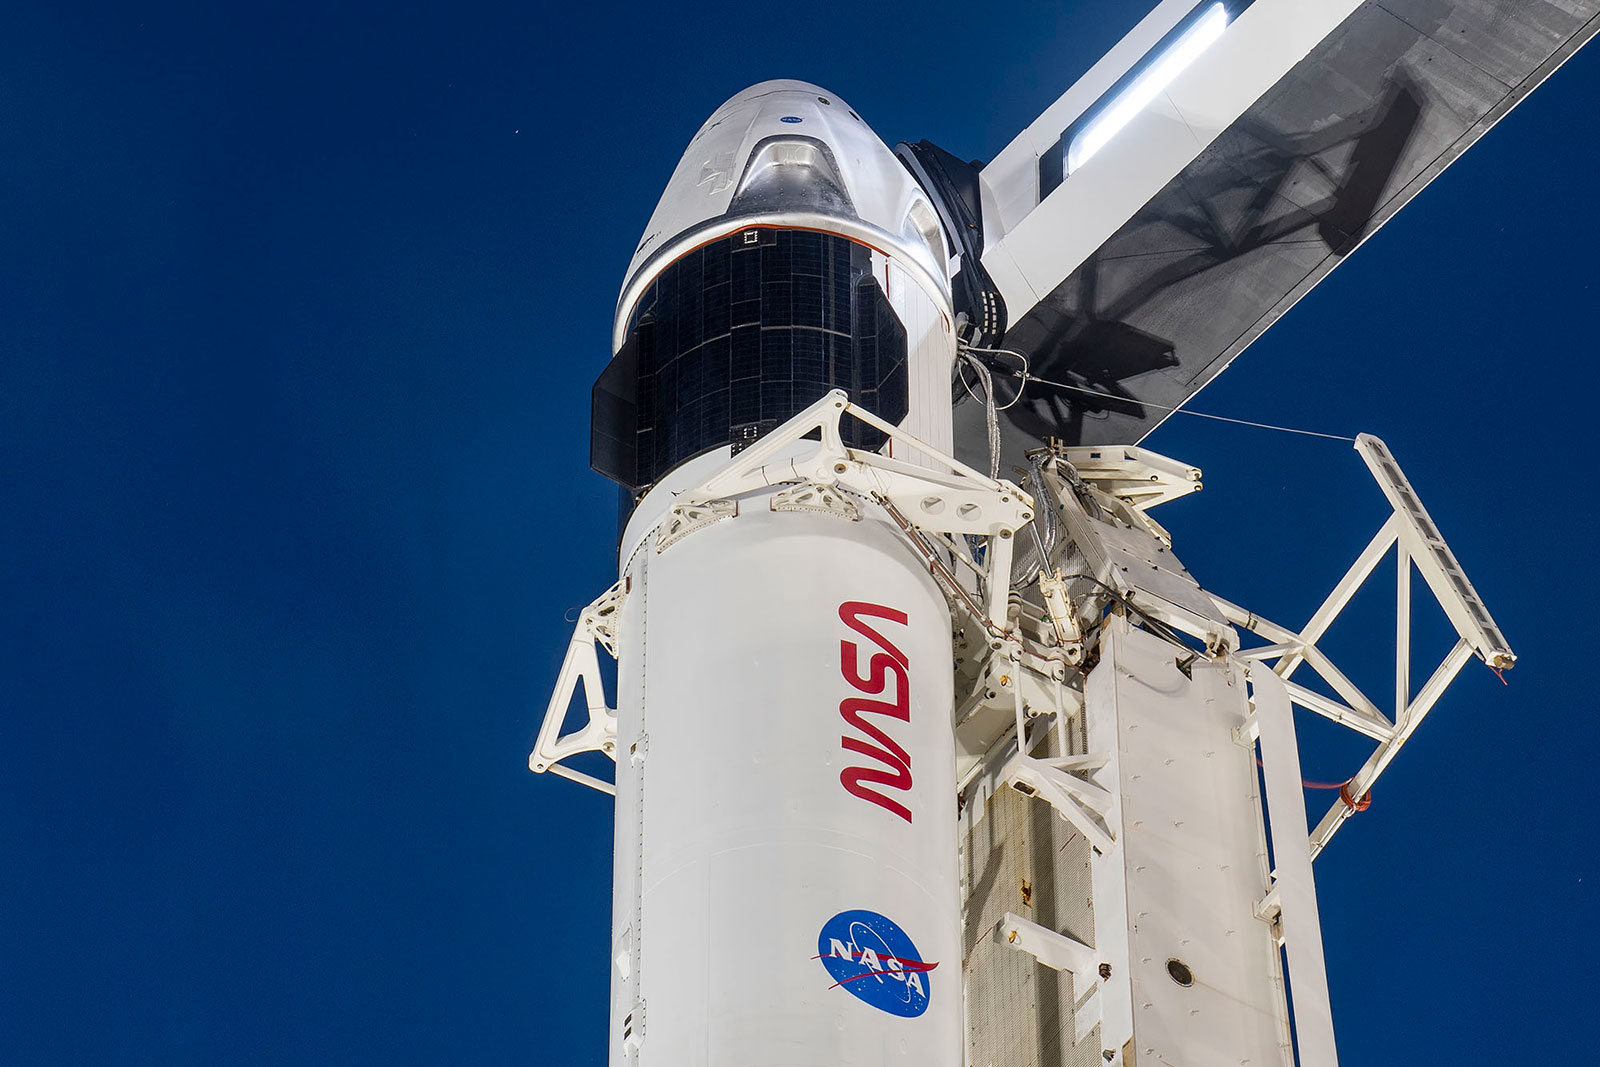 Watch SpaceX's first operational Crew Dragon mission at 7:27PM ET